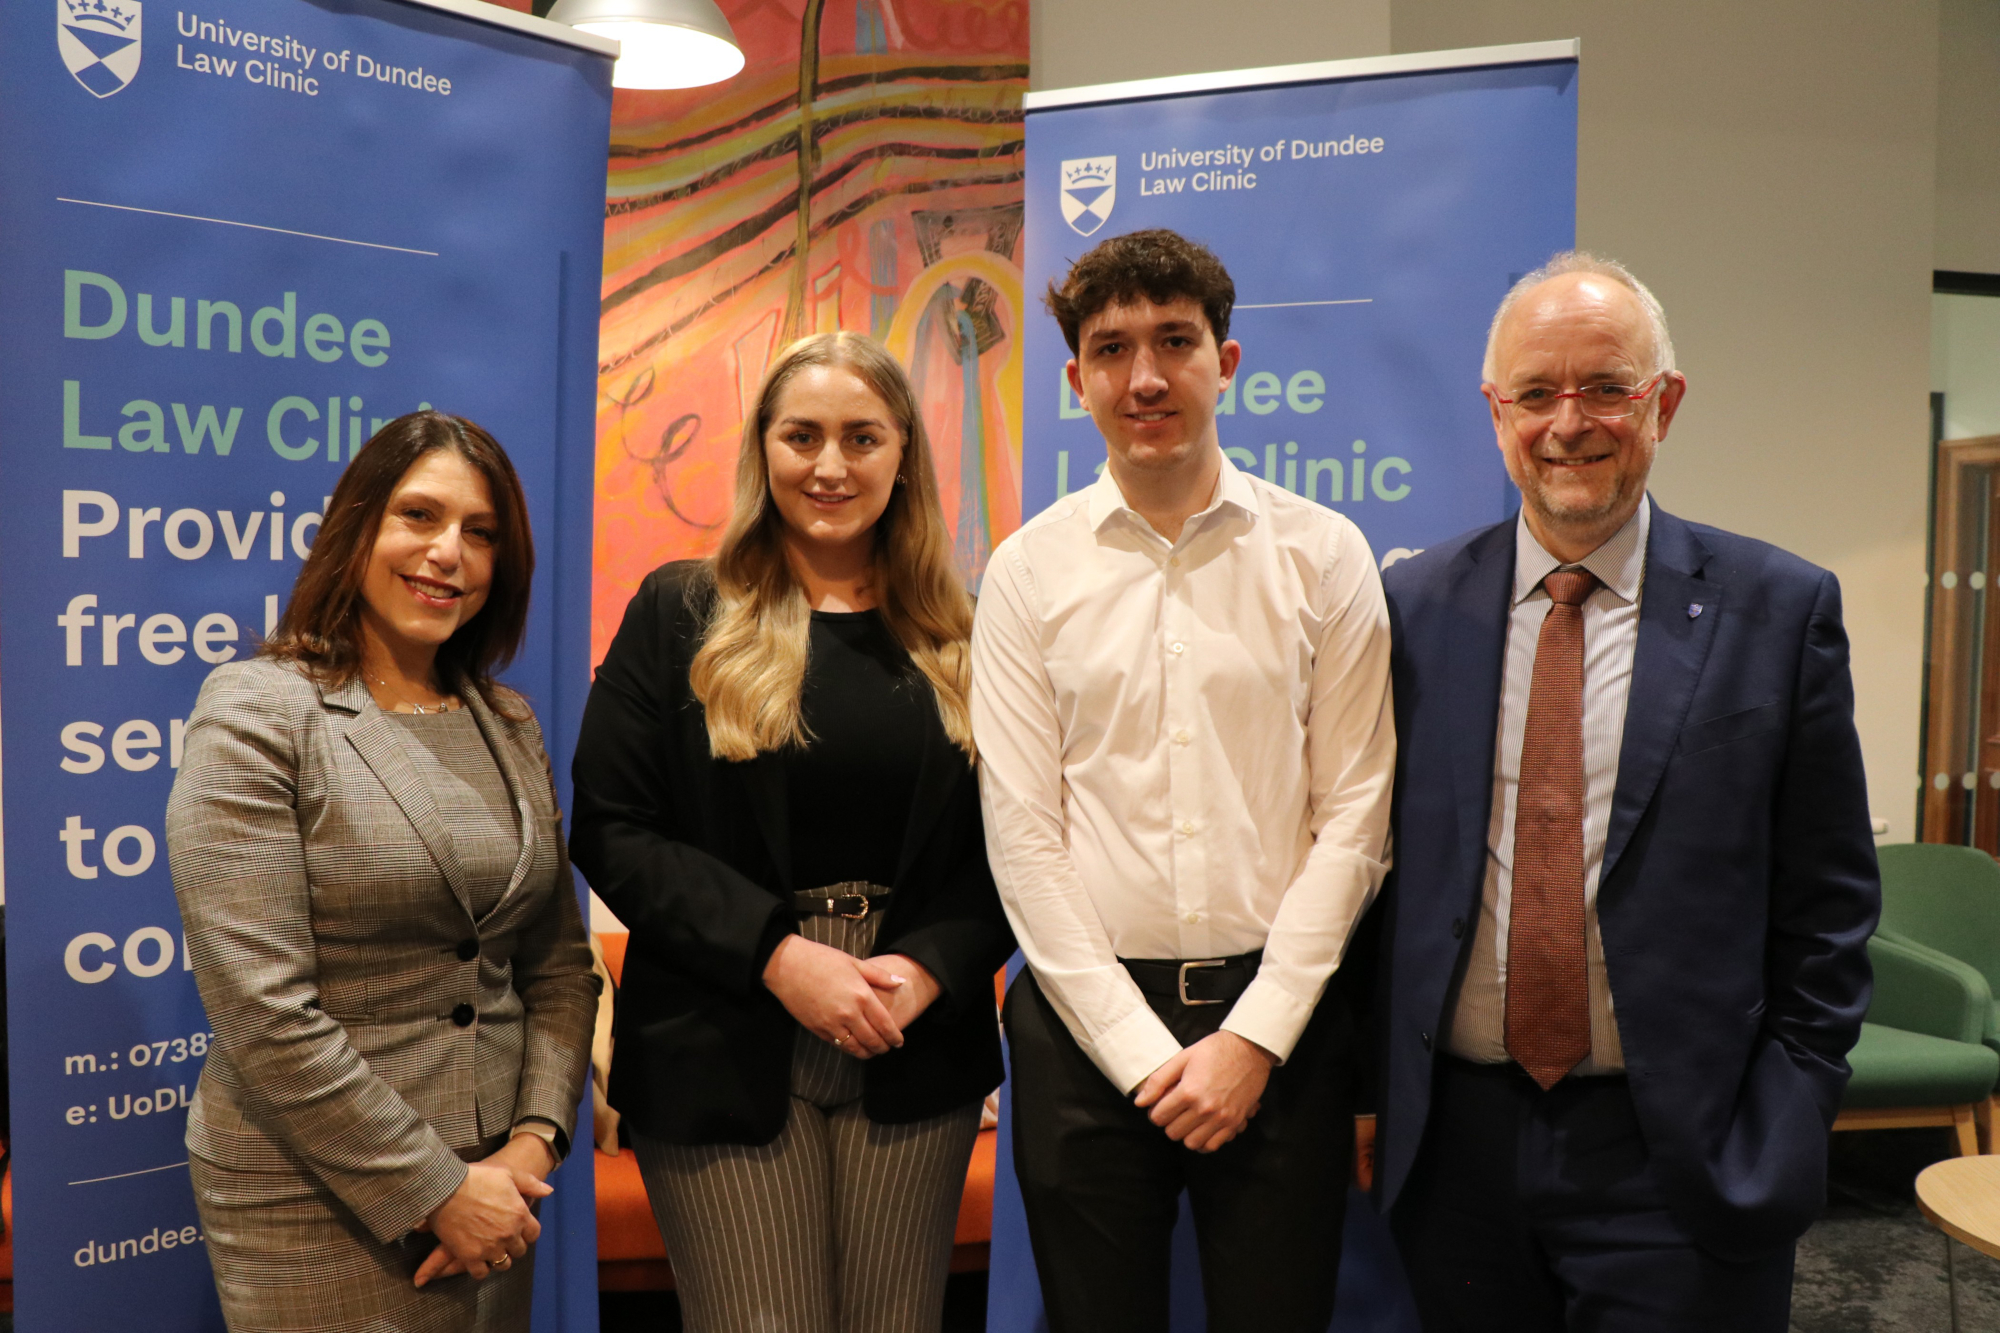 Dundee Law School unveils new student law clinic backed by Judge Tim Eicke